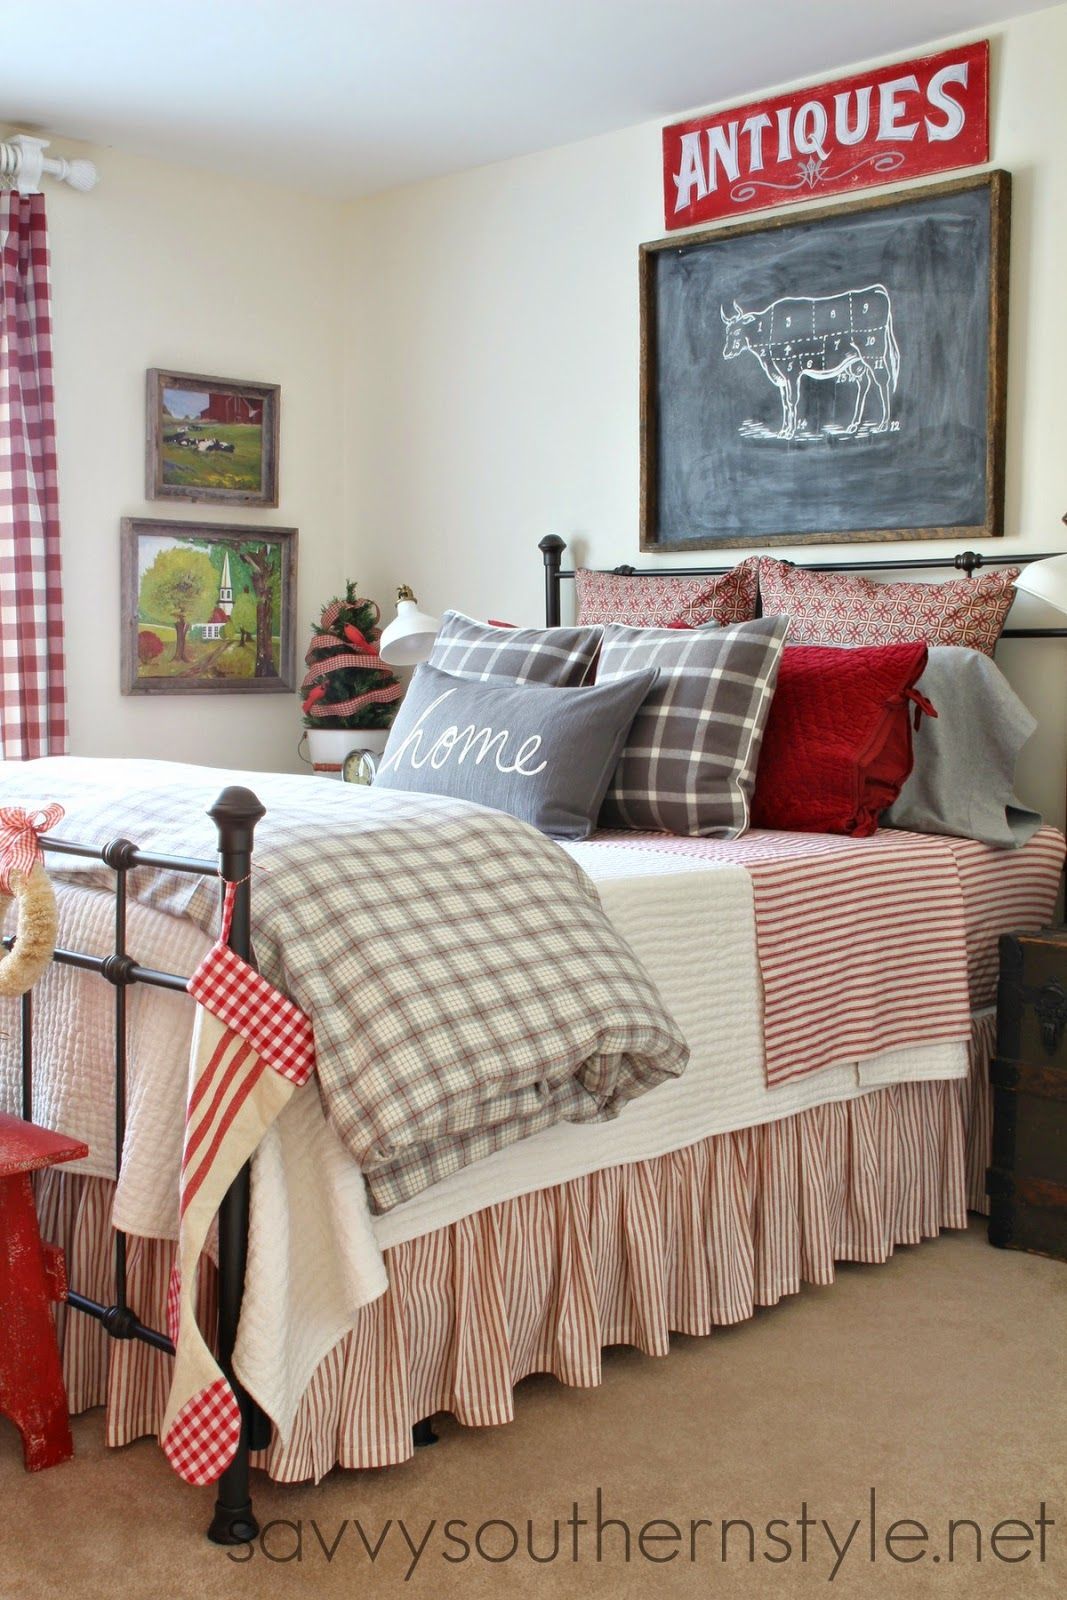 Savvy Southern Style: Farmhouse Guest Room Christmas